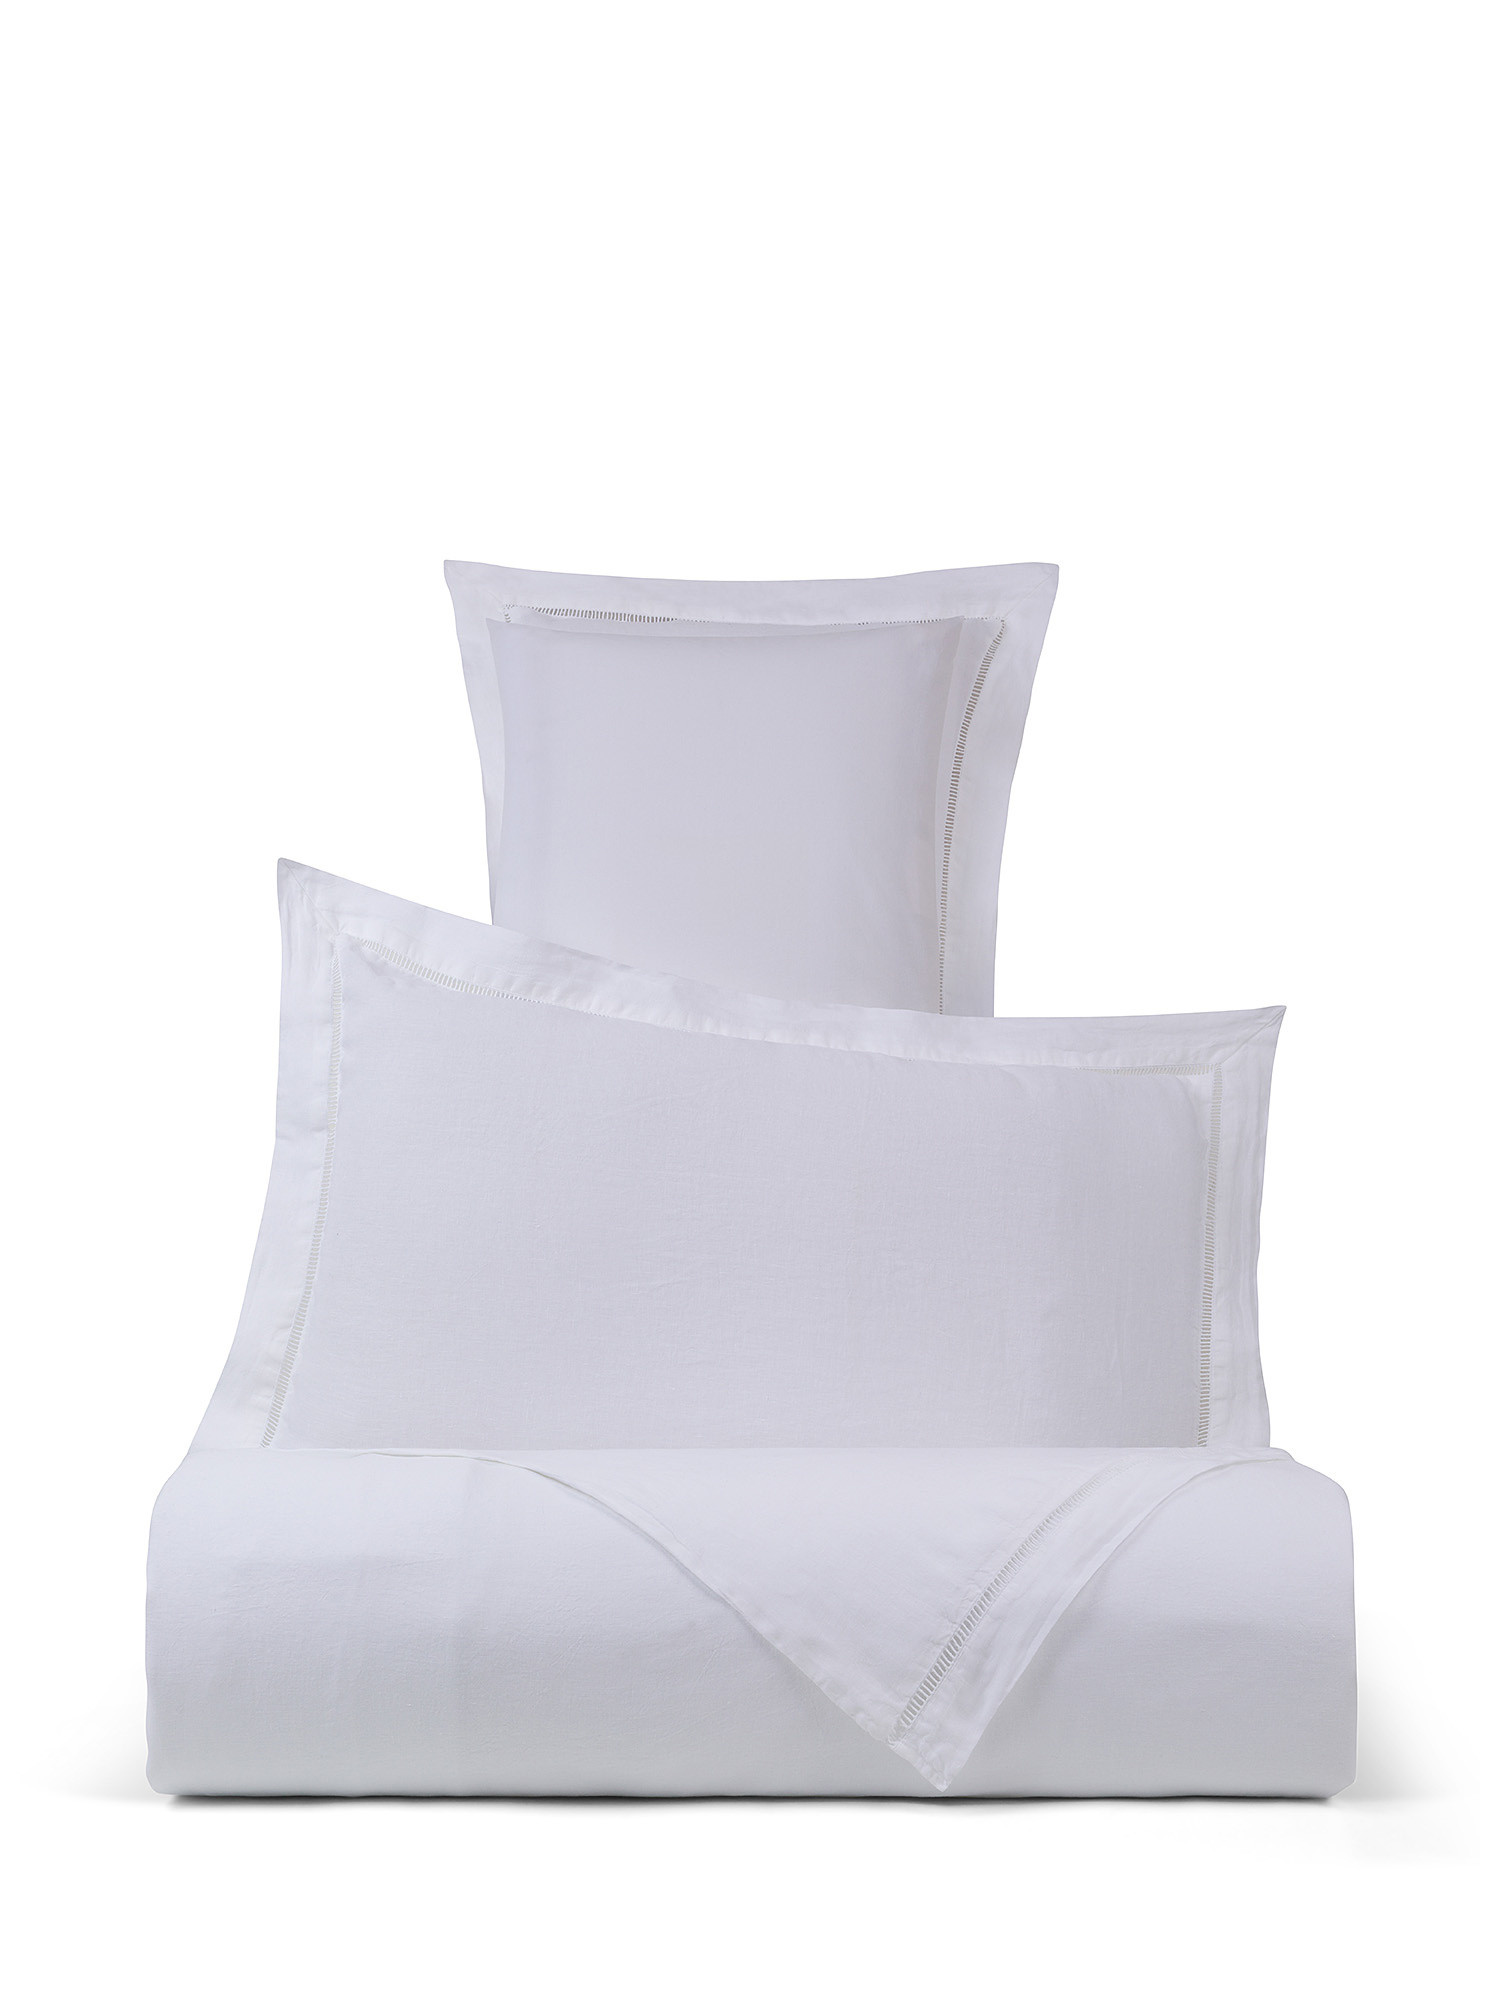 Portofino smooth pure linen sheet with a-jour hem, White, large image number 0